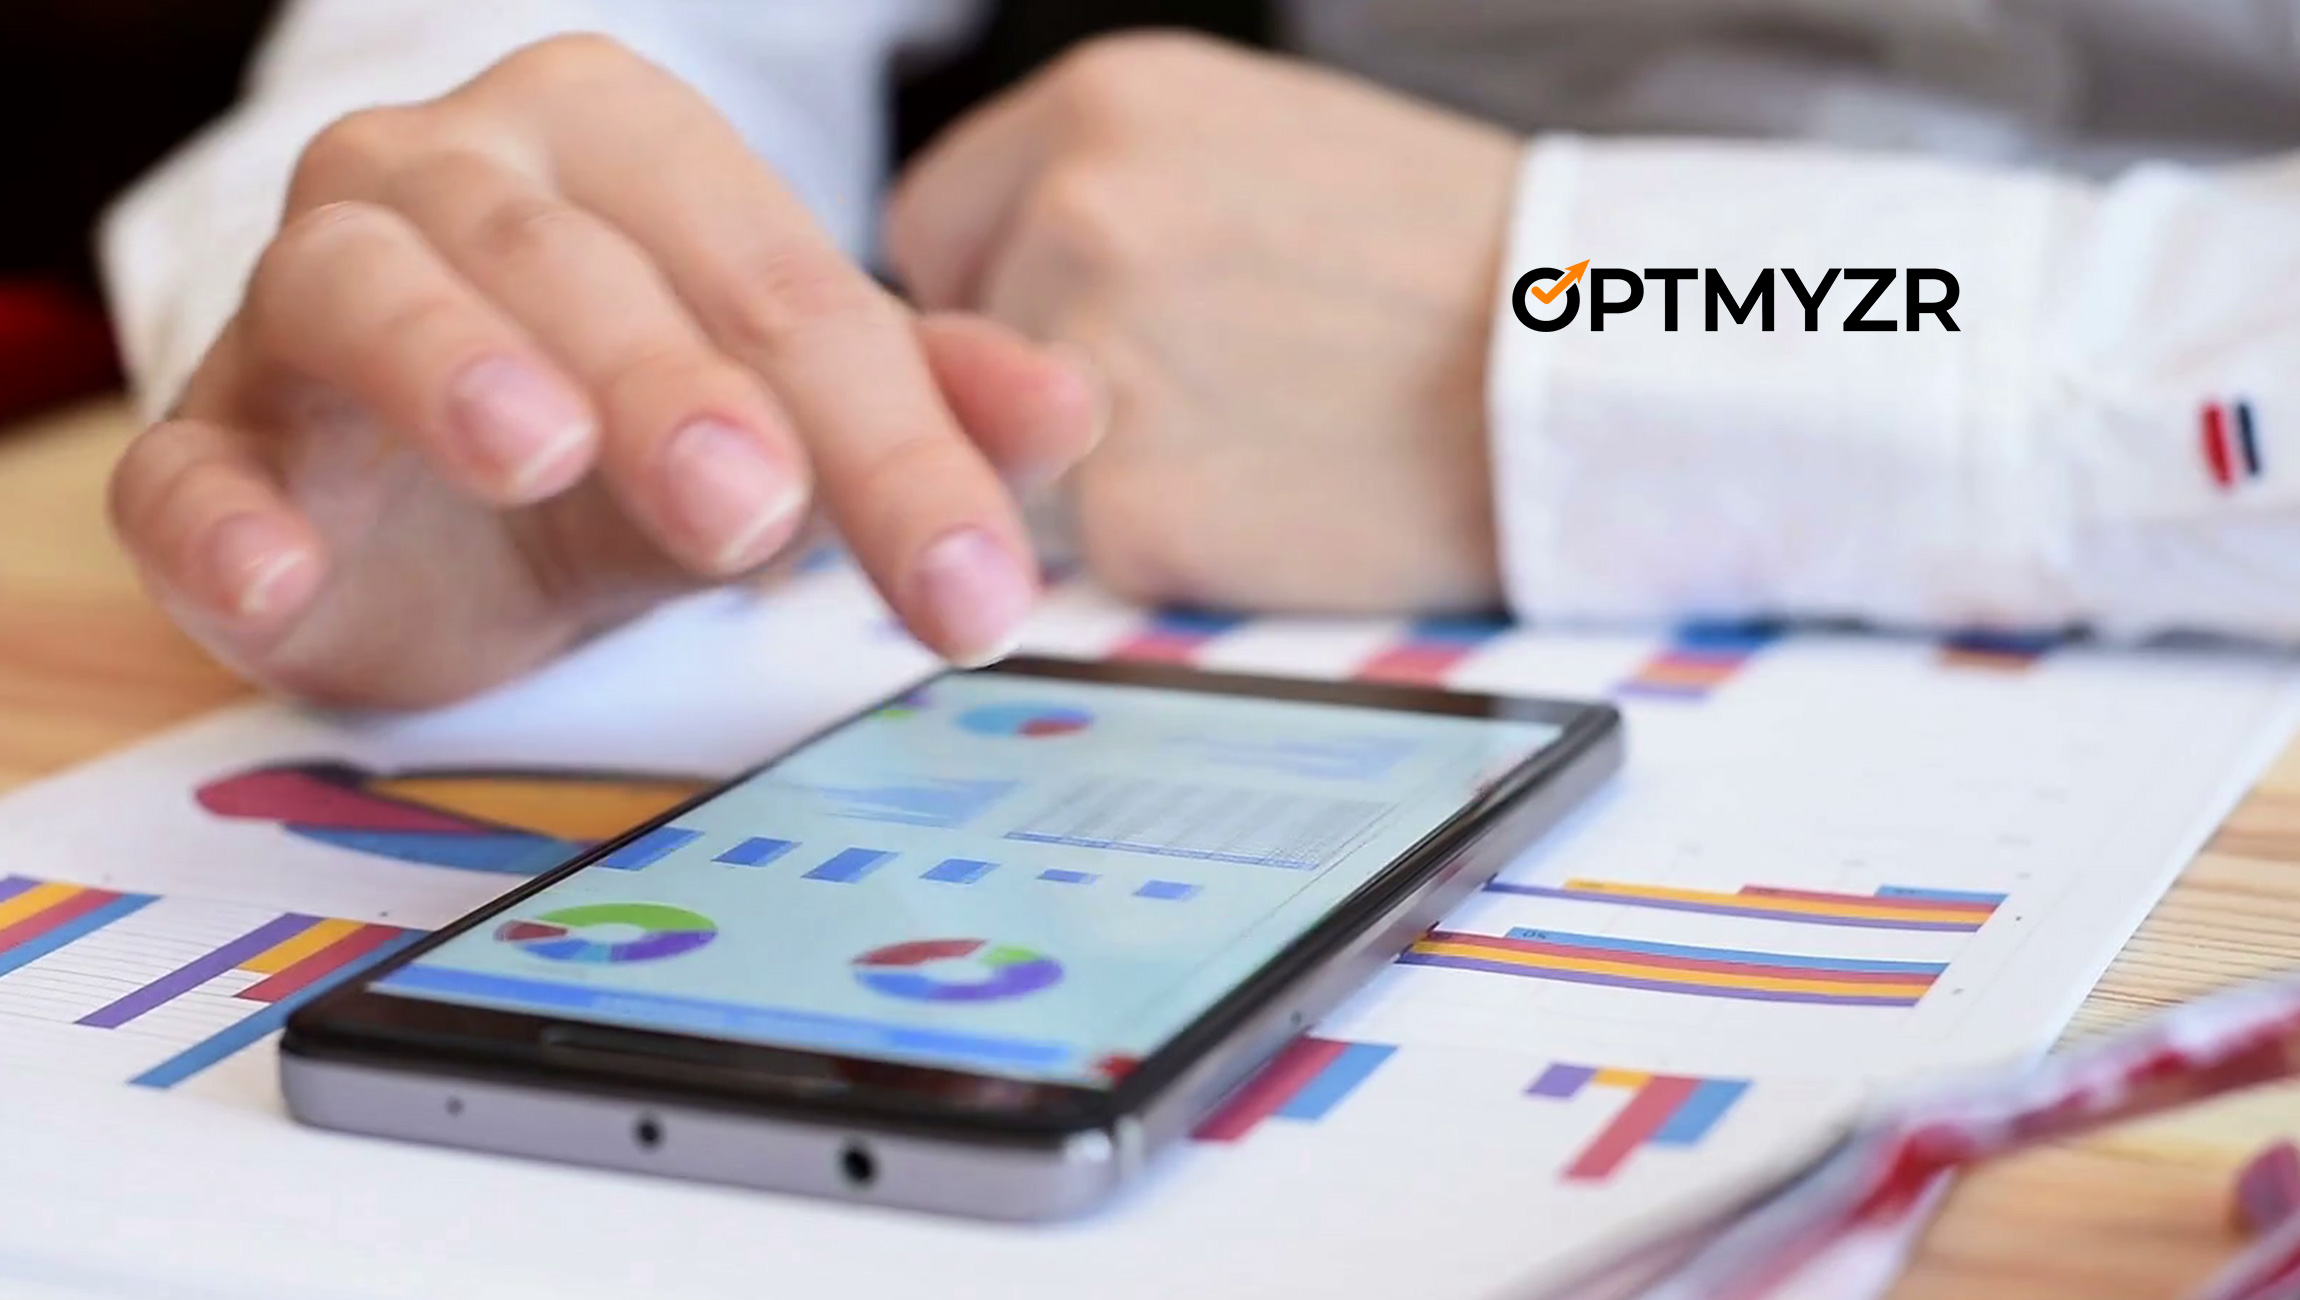 Optmyzr Expands Amazon Ads Capabilities Within Its Full Pay-Per-Click